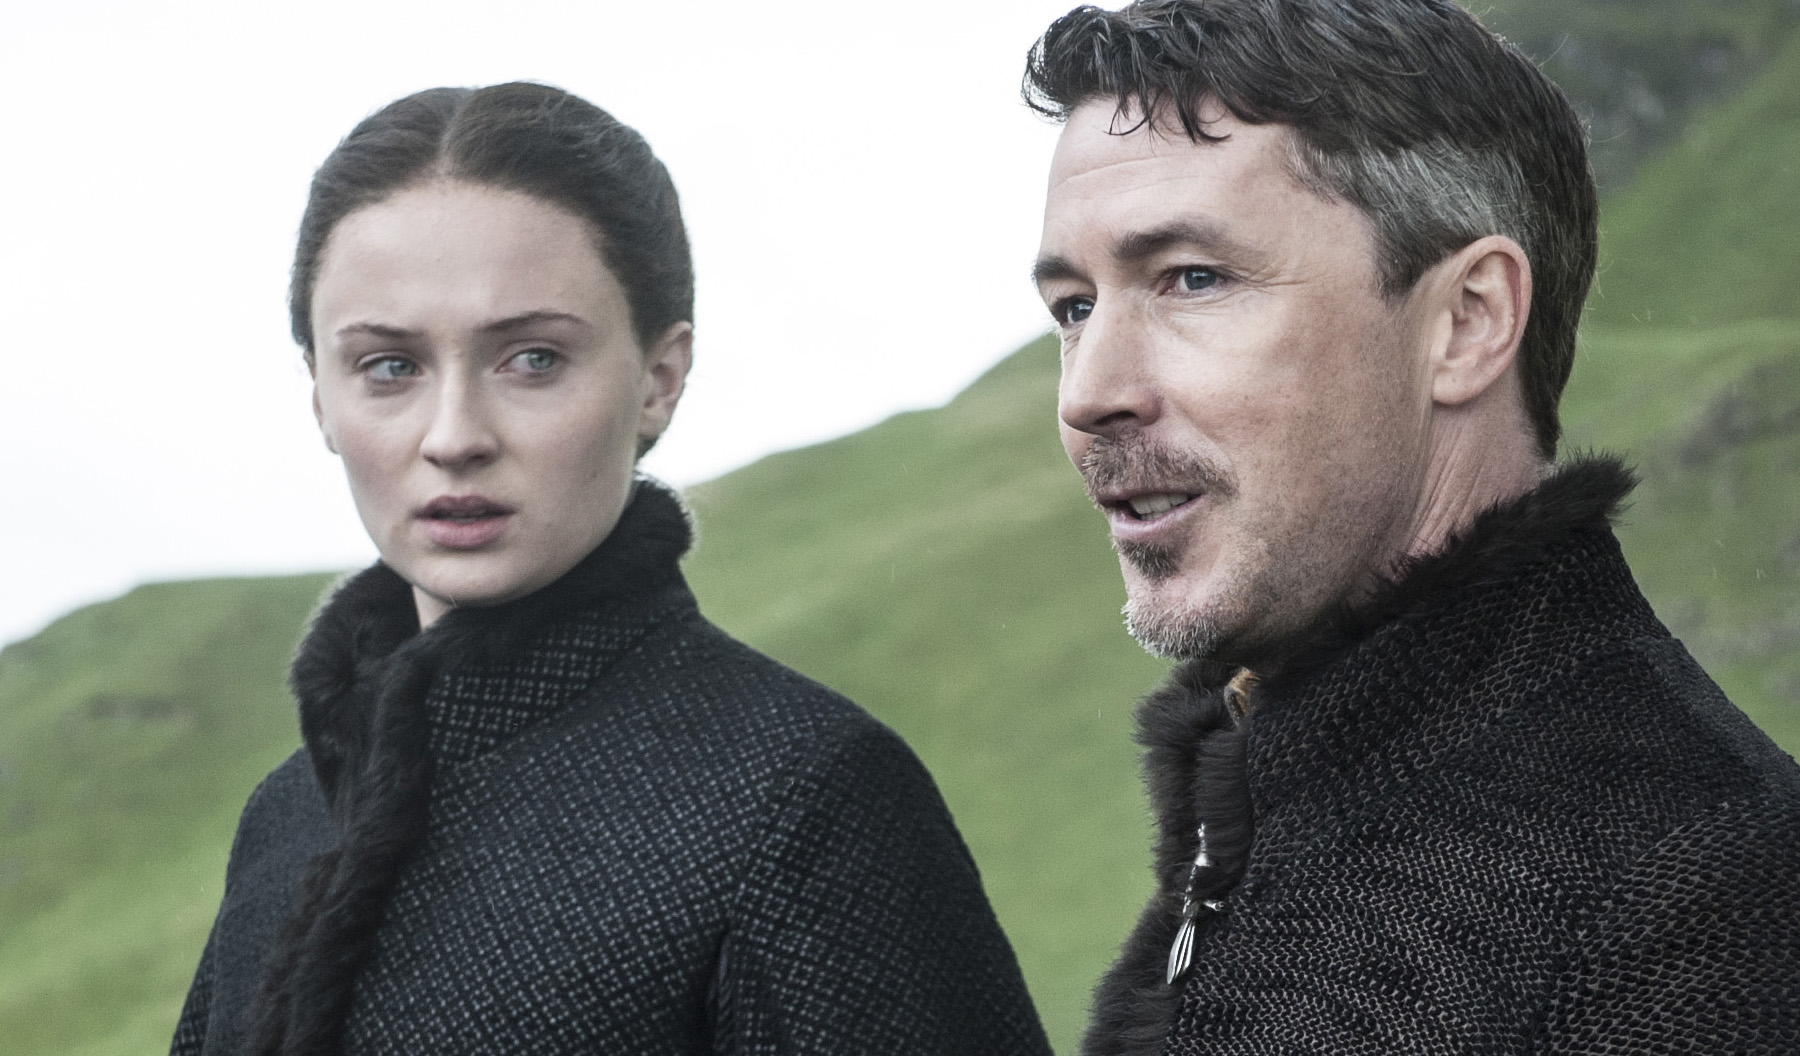 Game of Thrones Theories: Where are Sansa and Littlefinger Going in Season 5?